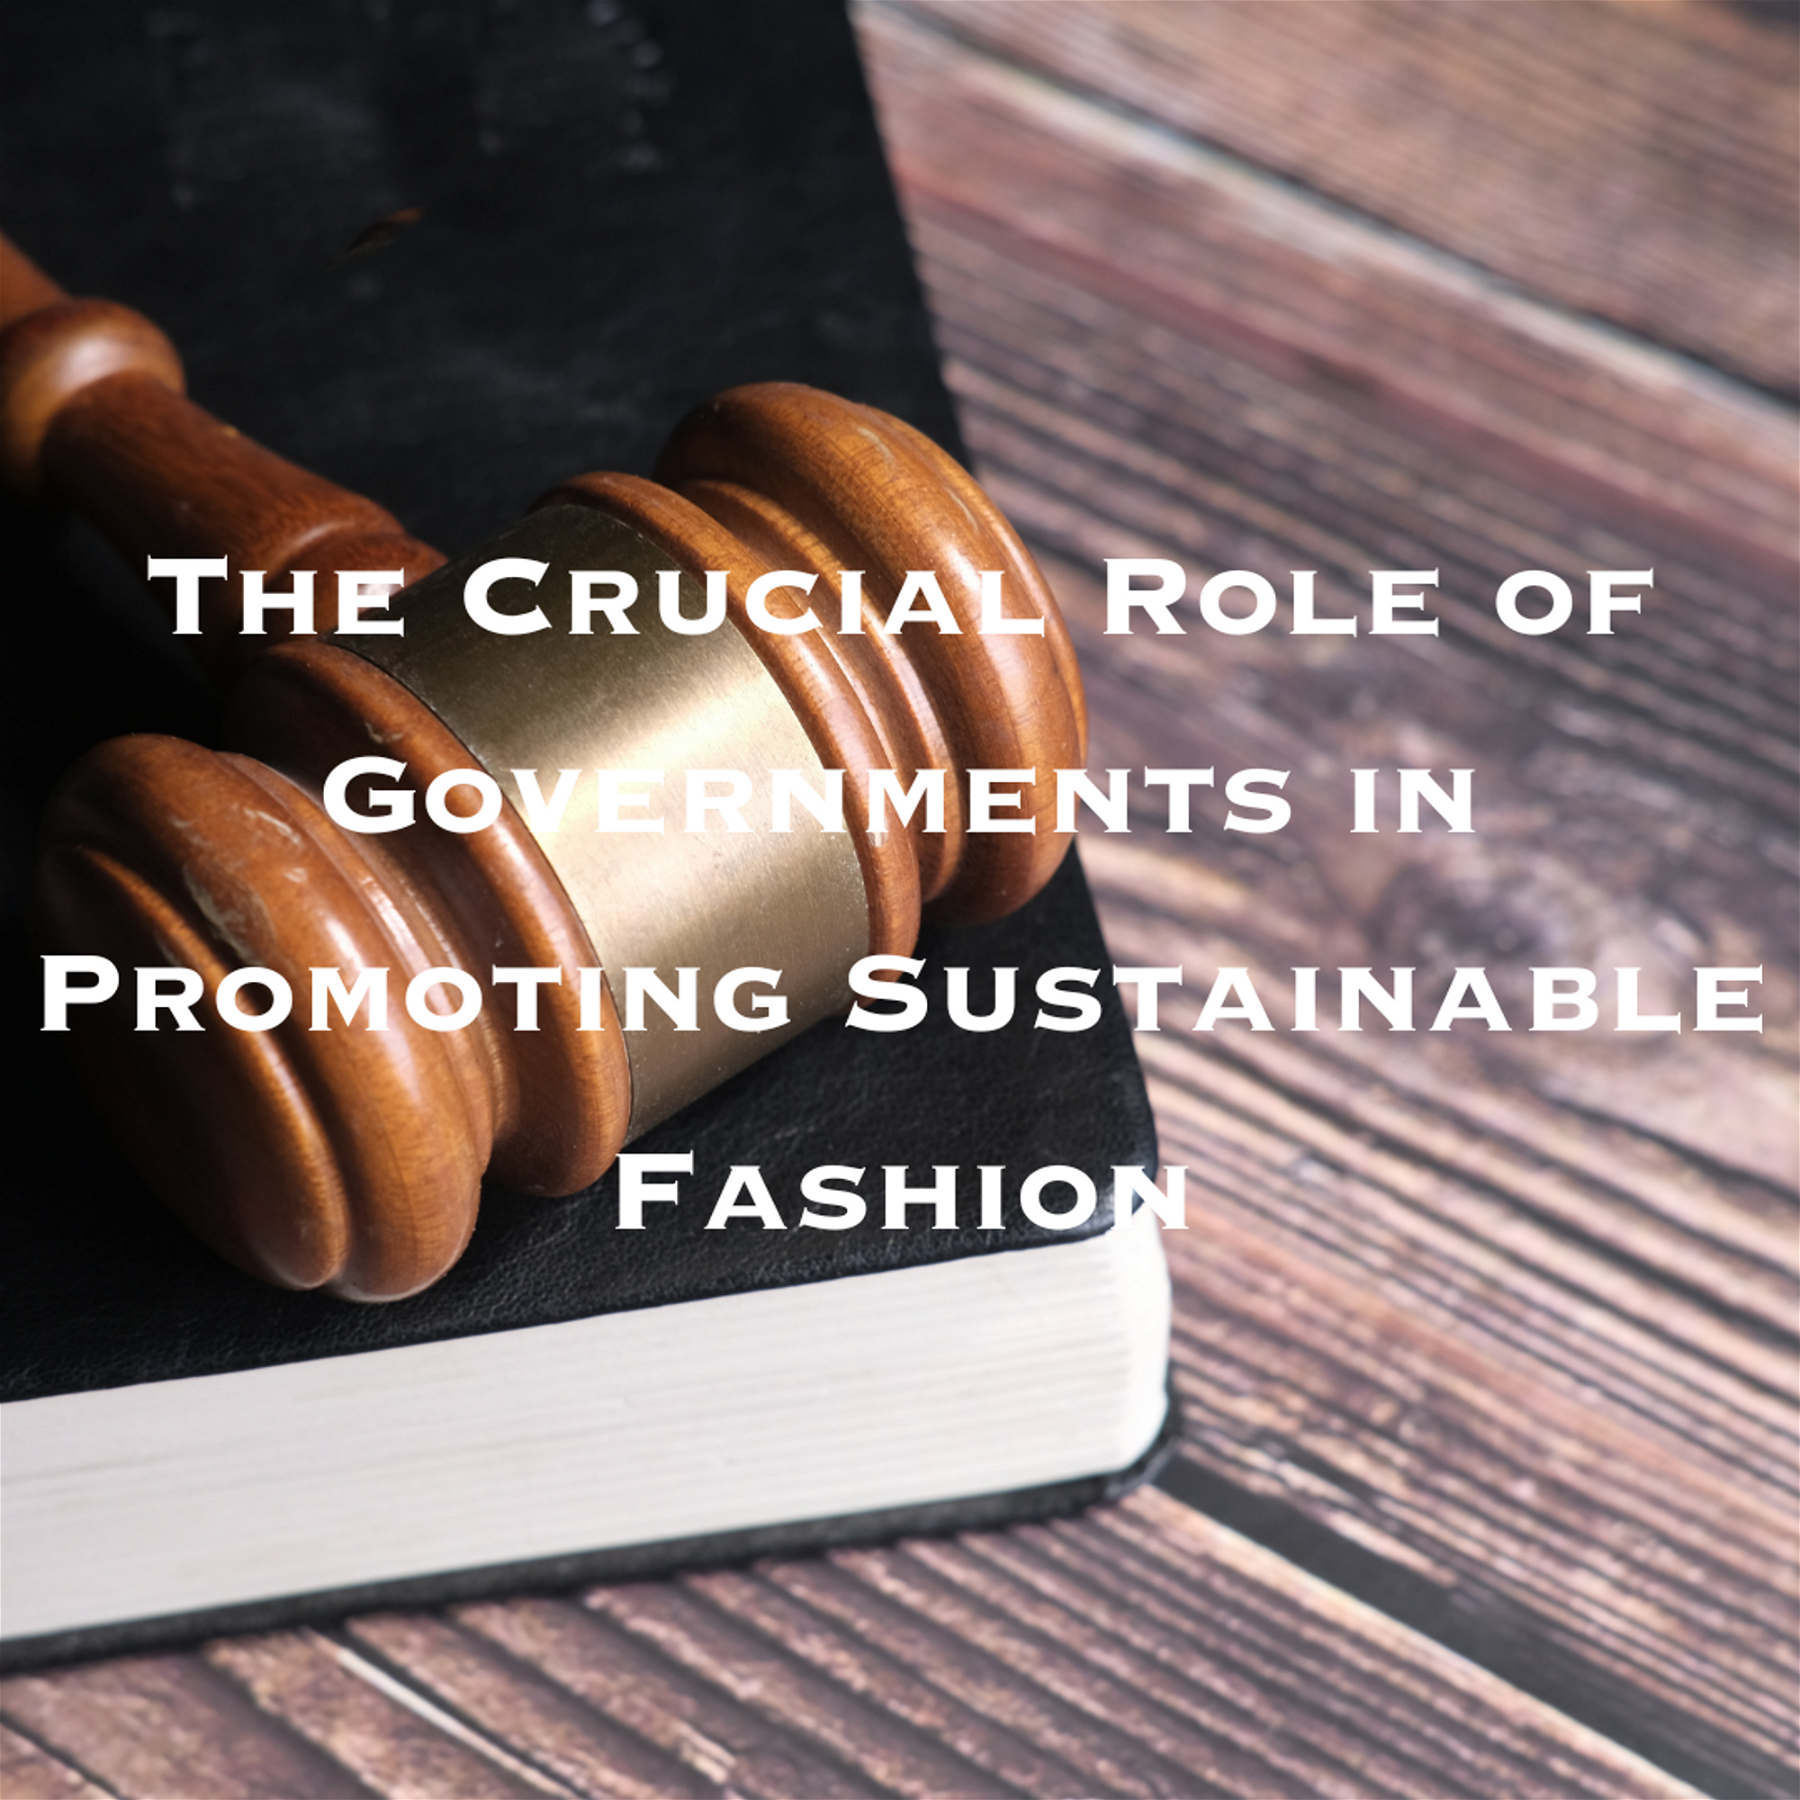 Driving Change: The Crucial Role of Governments in Promoting Sustainable Fashion